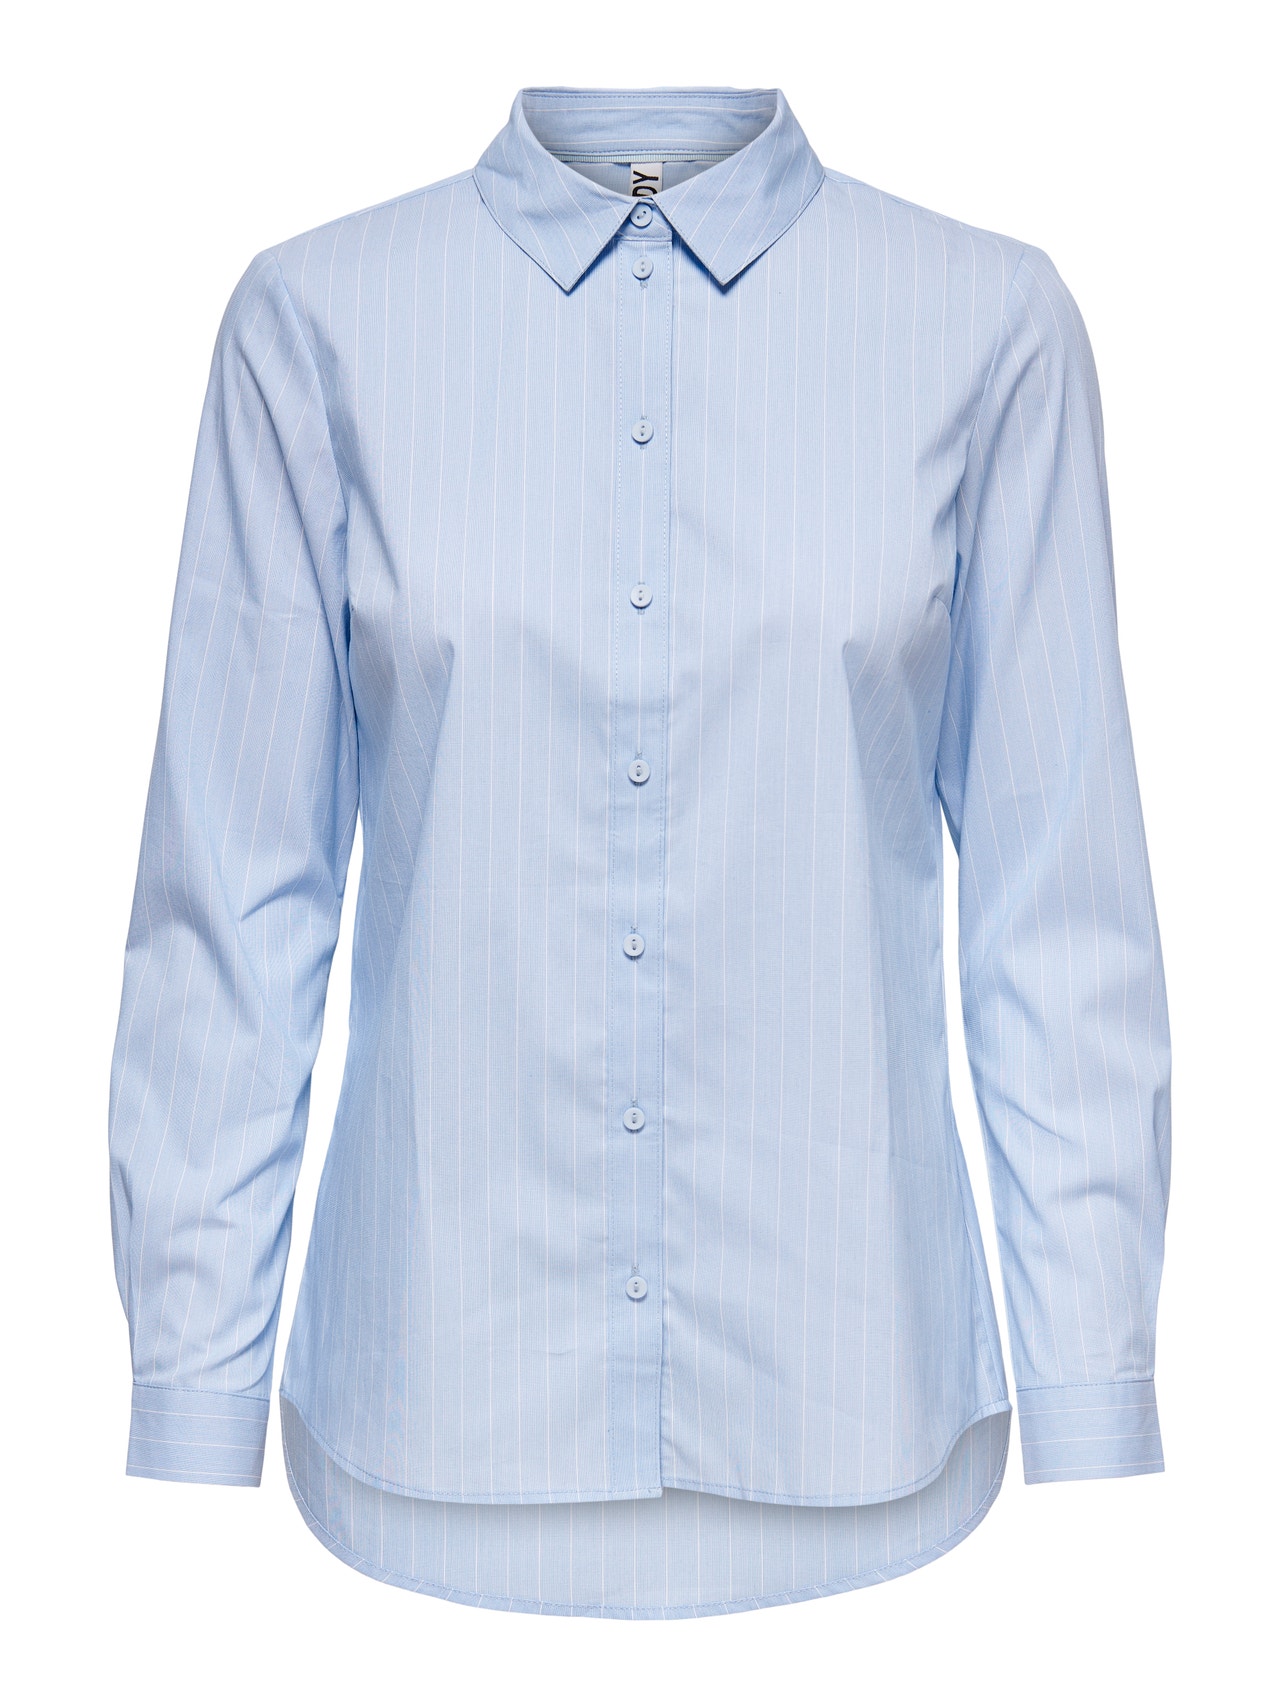 ONLY Regular Fit Shirt collar Buttoned cuffs Slim fitted sleeves Shirt -Cashmere Blue - 15149877